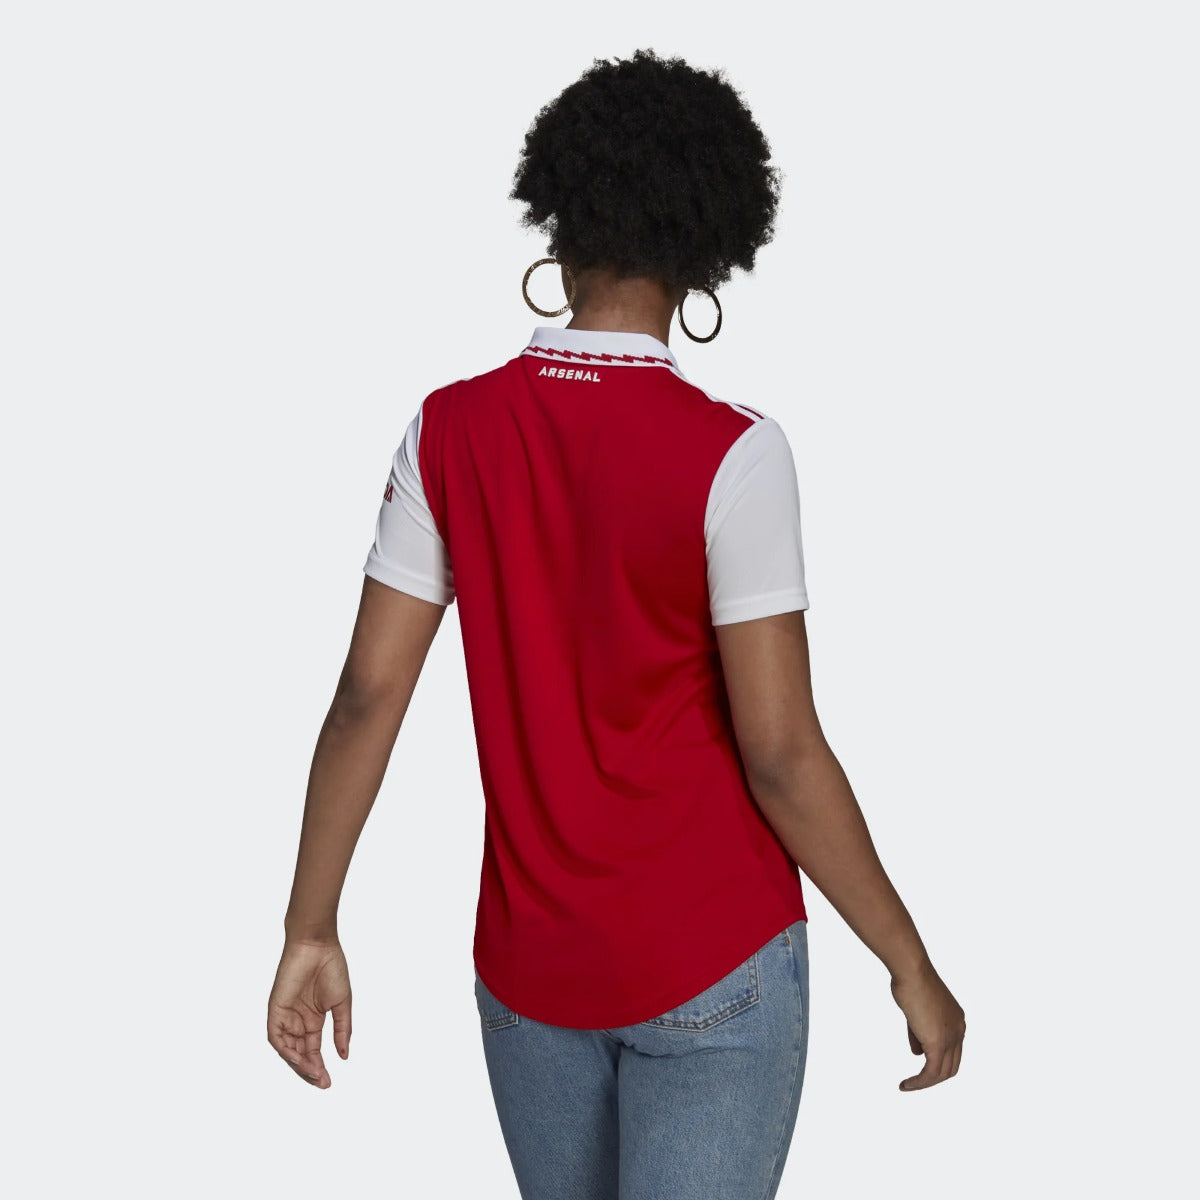 adidas 22-23 Arsenal Womens Home Jersey - Scarlet-White (Model - Back)